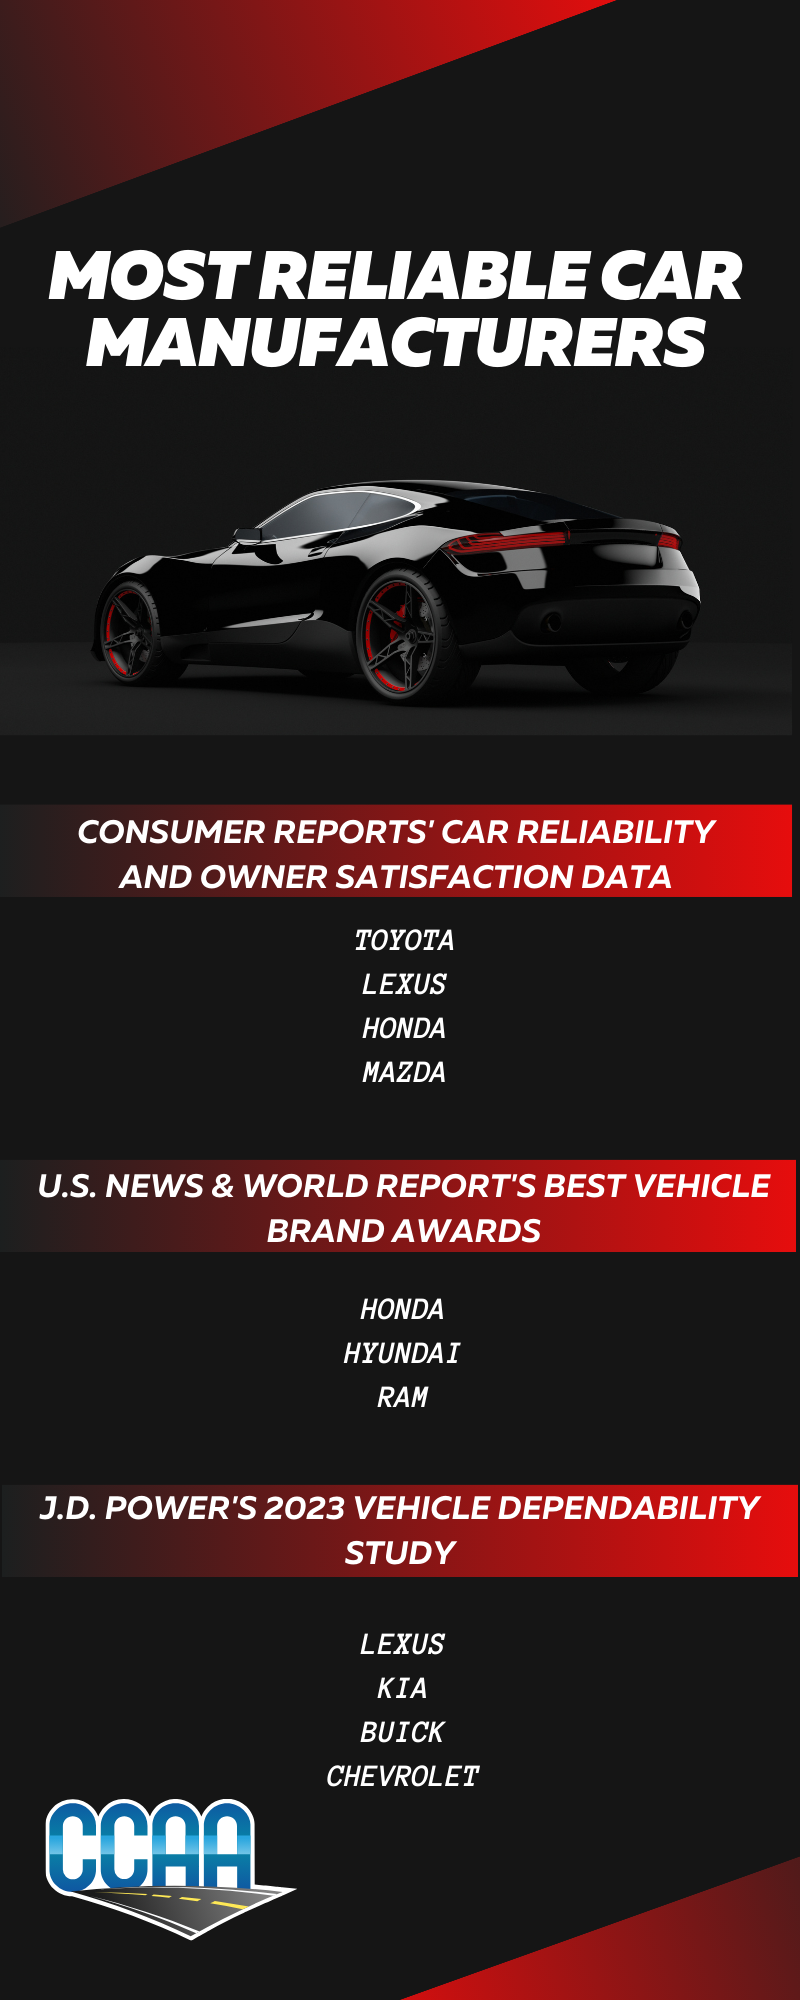 These are the most reliable car brands according to industry studies.